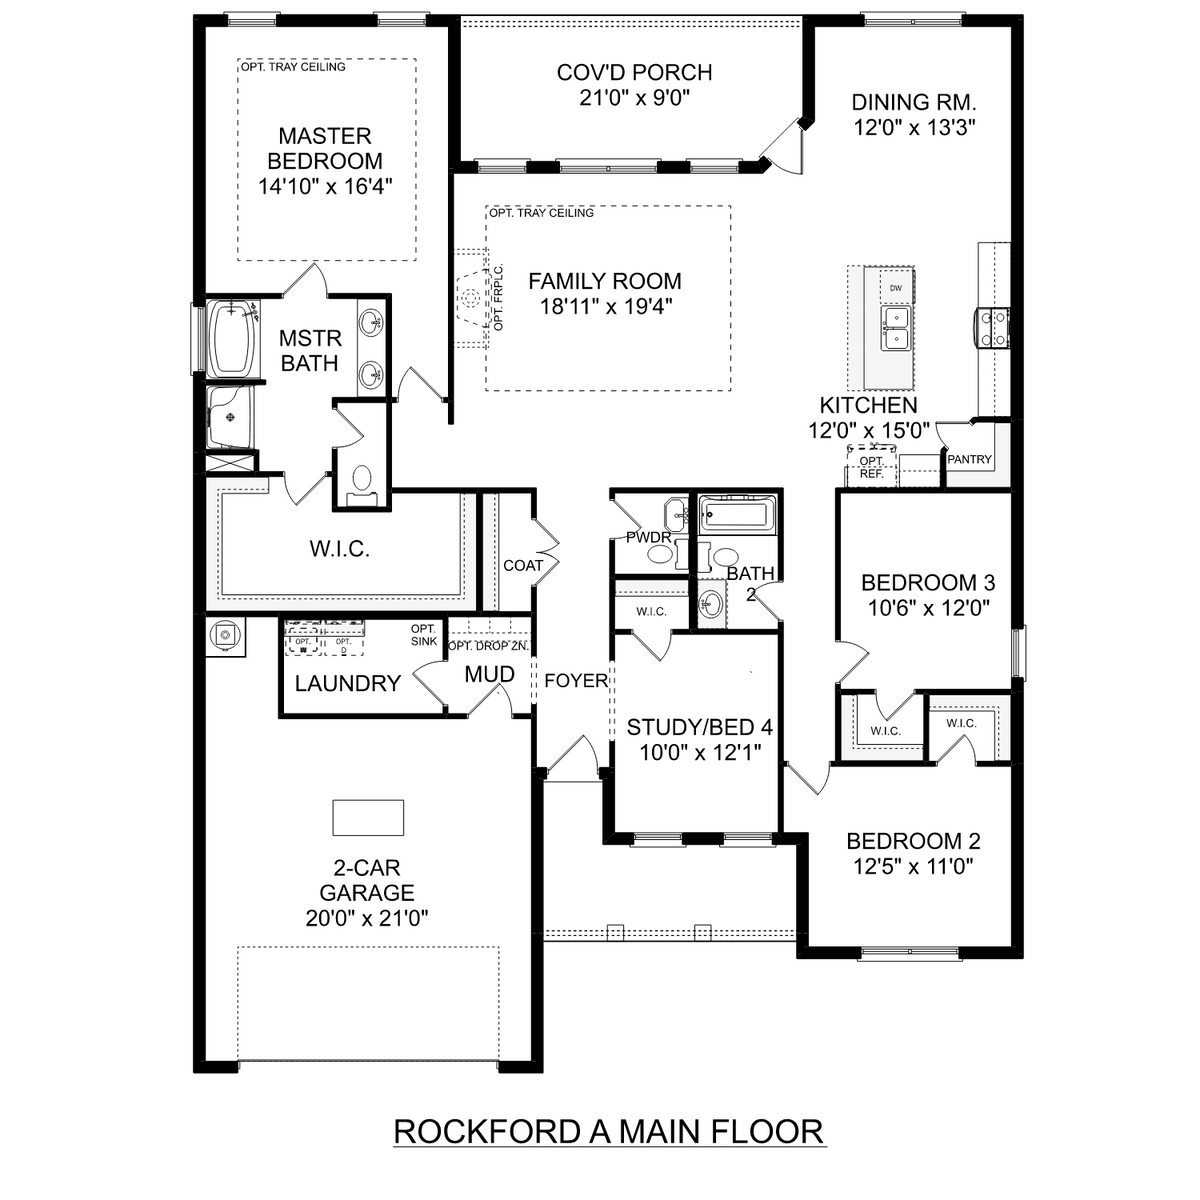 1 - The Rockford floor plan layout for 109 Ackert Drive in Davidson Homes' Pikes Ridge community.